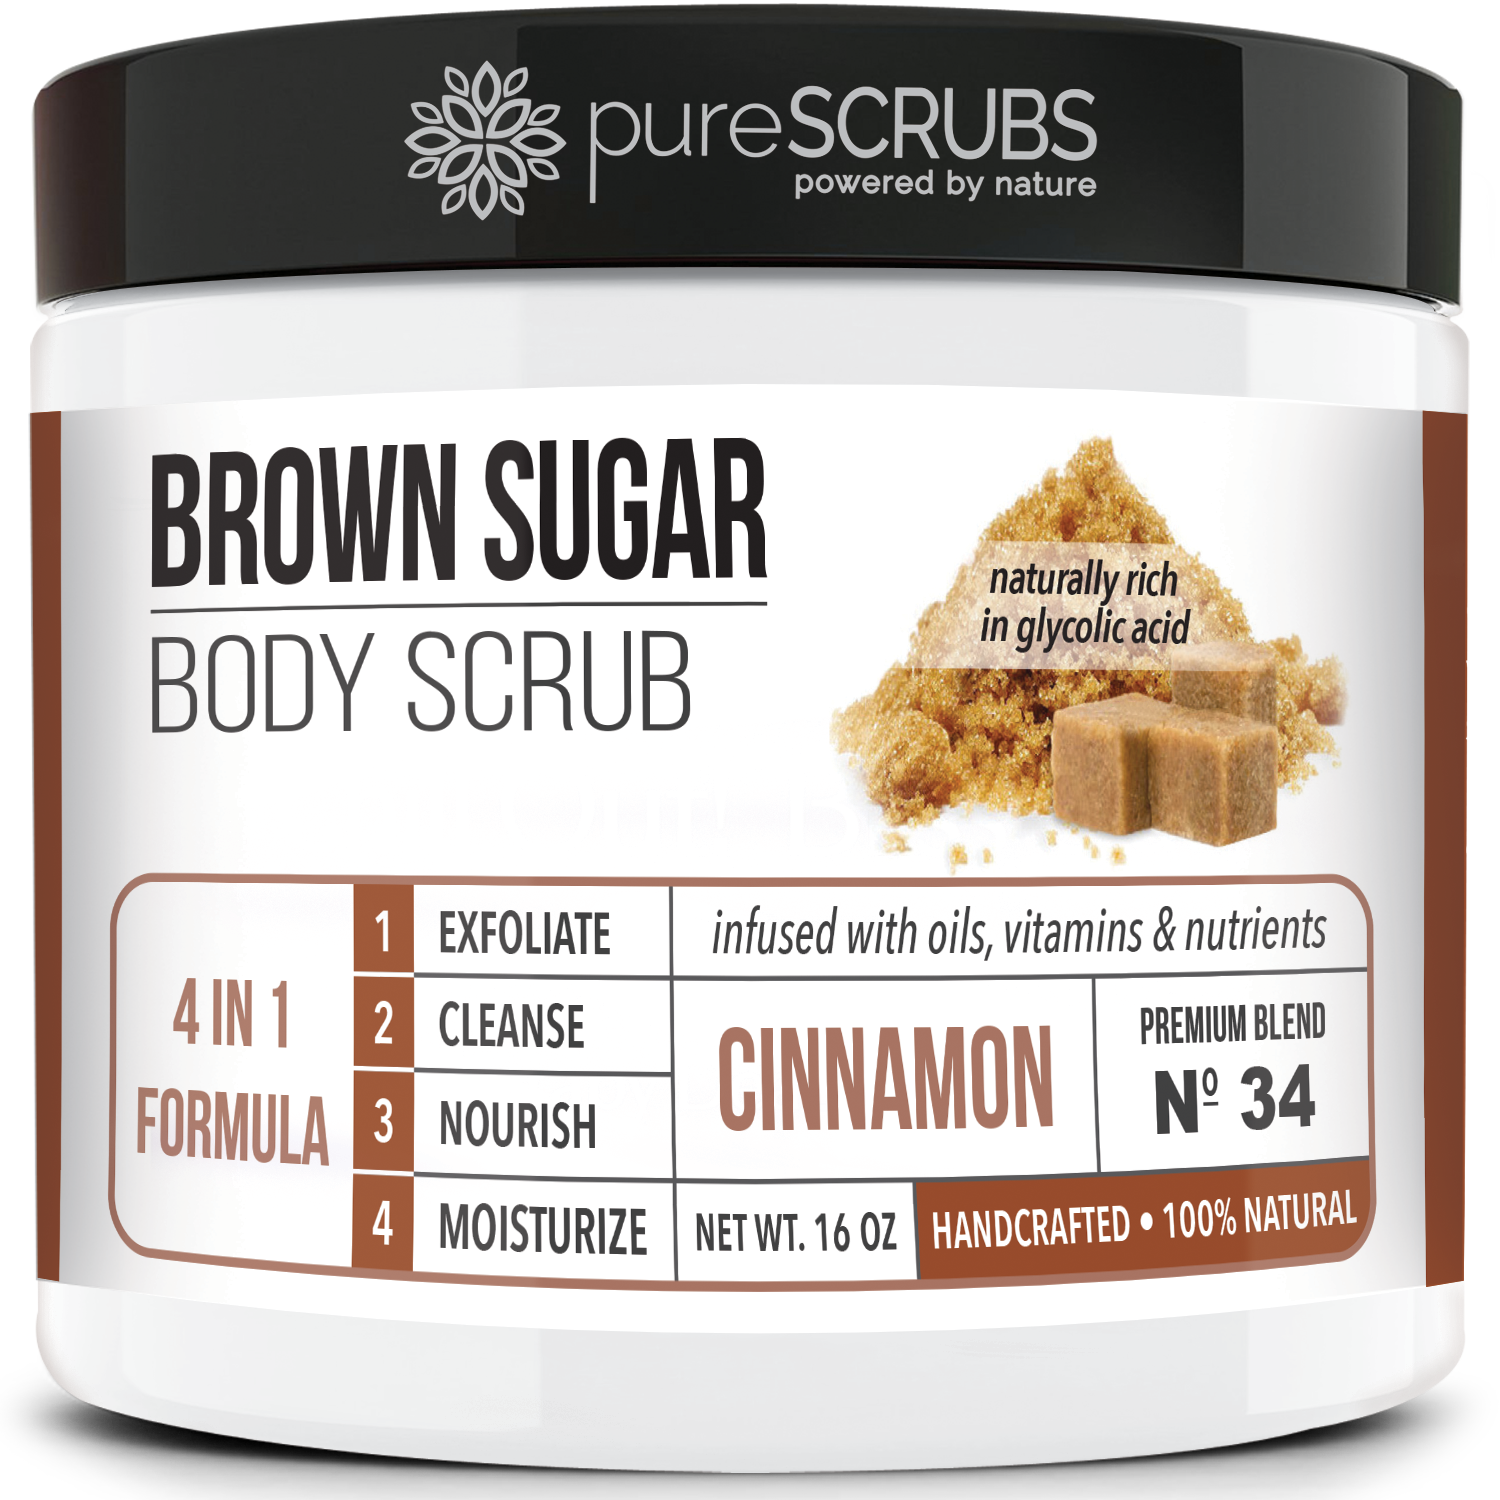 purescrubs Premium Blend #34 cinnamon brown sugar body scrub to exfoliate your skin comes with free loofah pad free exfoliating organic oatmeal bar soap shea butter and honey and free eco-friendly bamboo spoon to stir and scoop out the scrub 